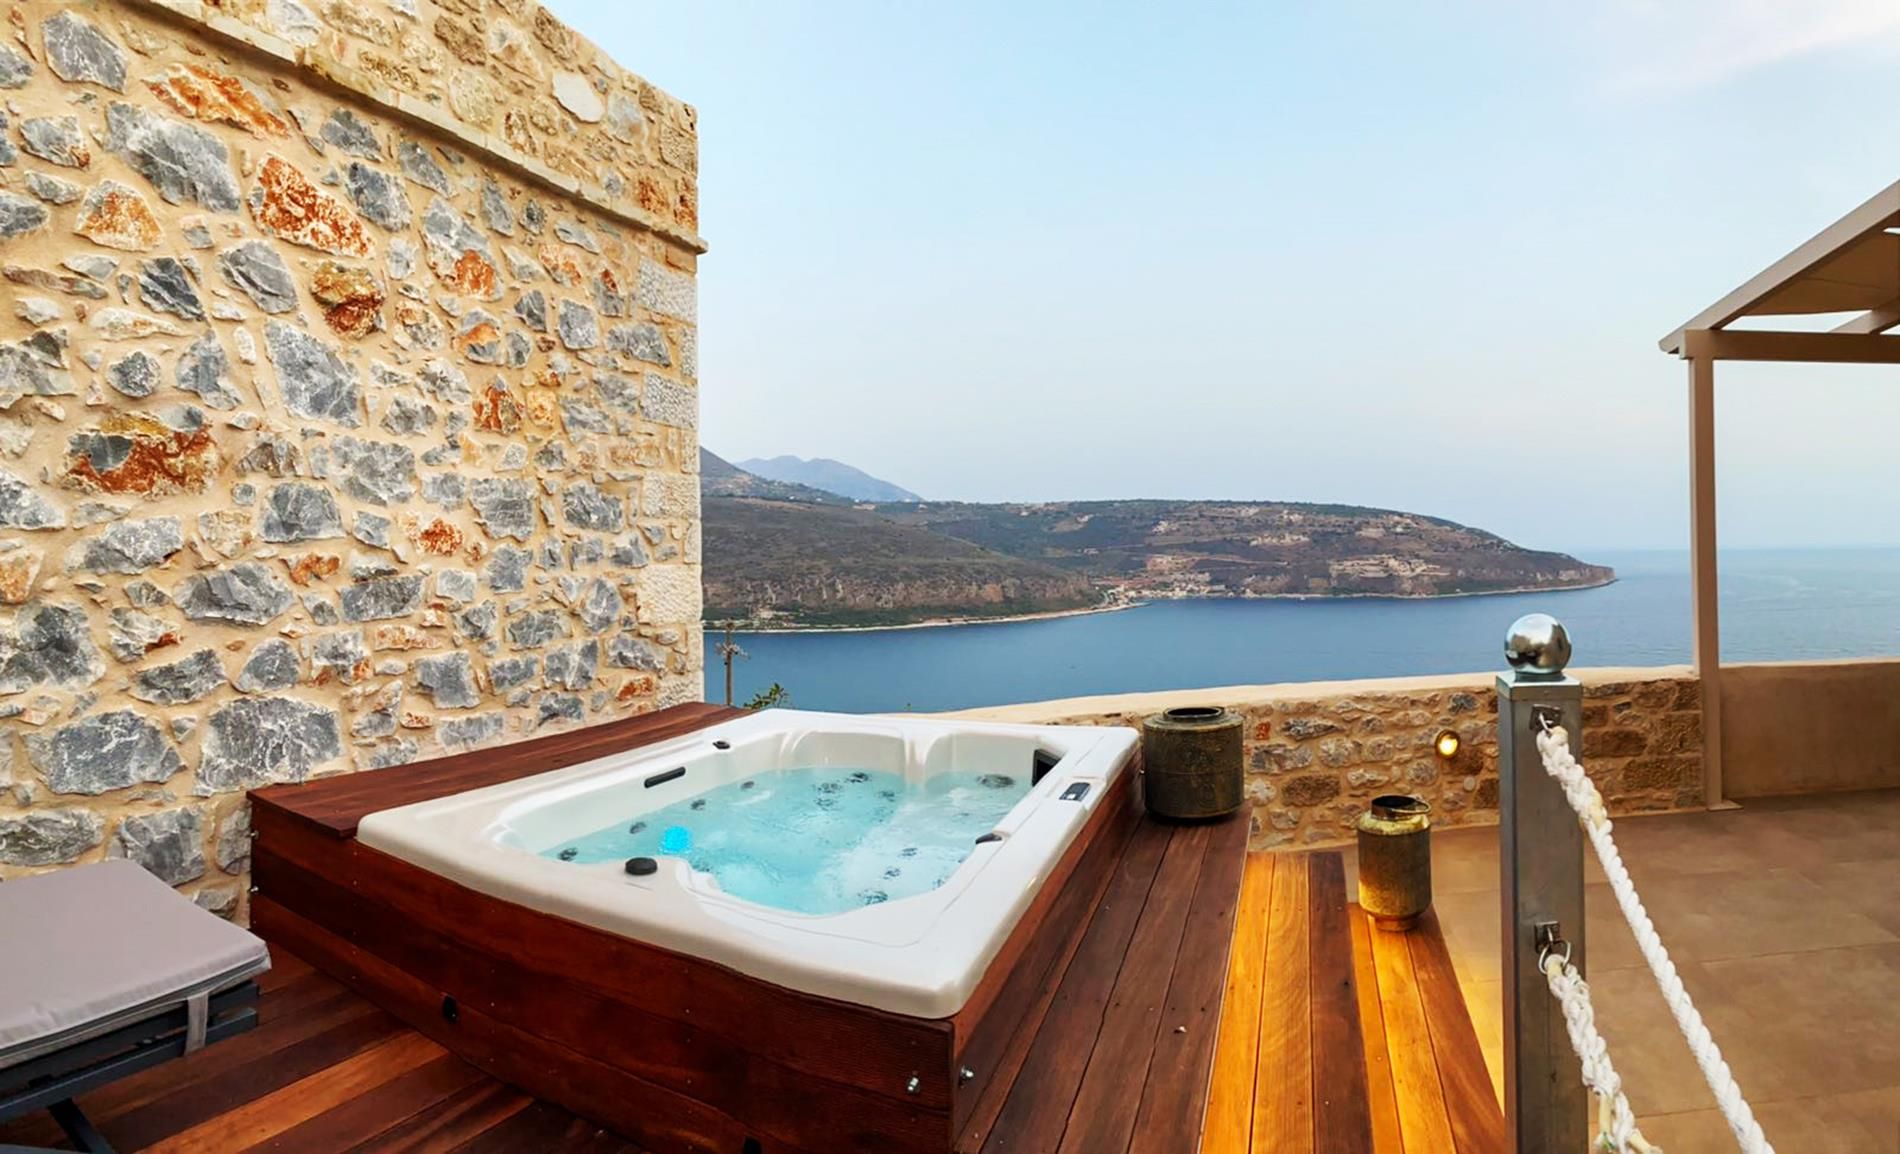 Akrolithi Boutique Hotel - Οίτυλο, Μάνη ✦ 3 Ημέρες (2 Διανυκτερεύσεις) ✦ 2 άτομα ✦ 2 ✦ 01/09/2022 έως 31/10/2022 ✦ Early check in και Late check out κατόπιν διαθεσιμότητας!